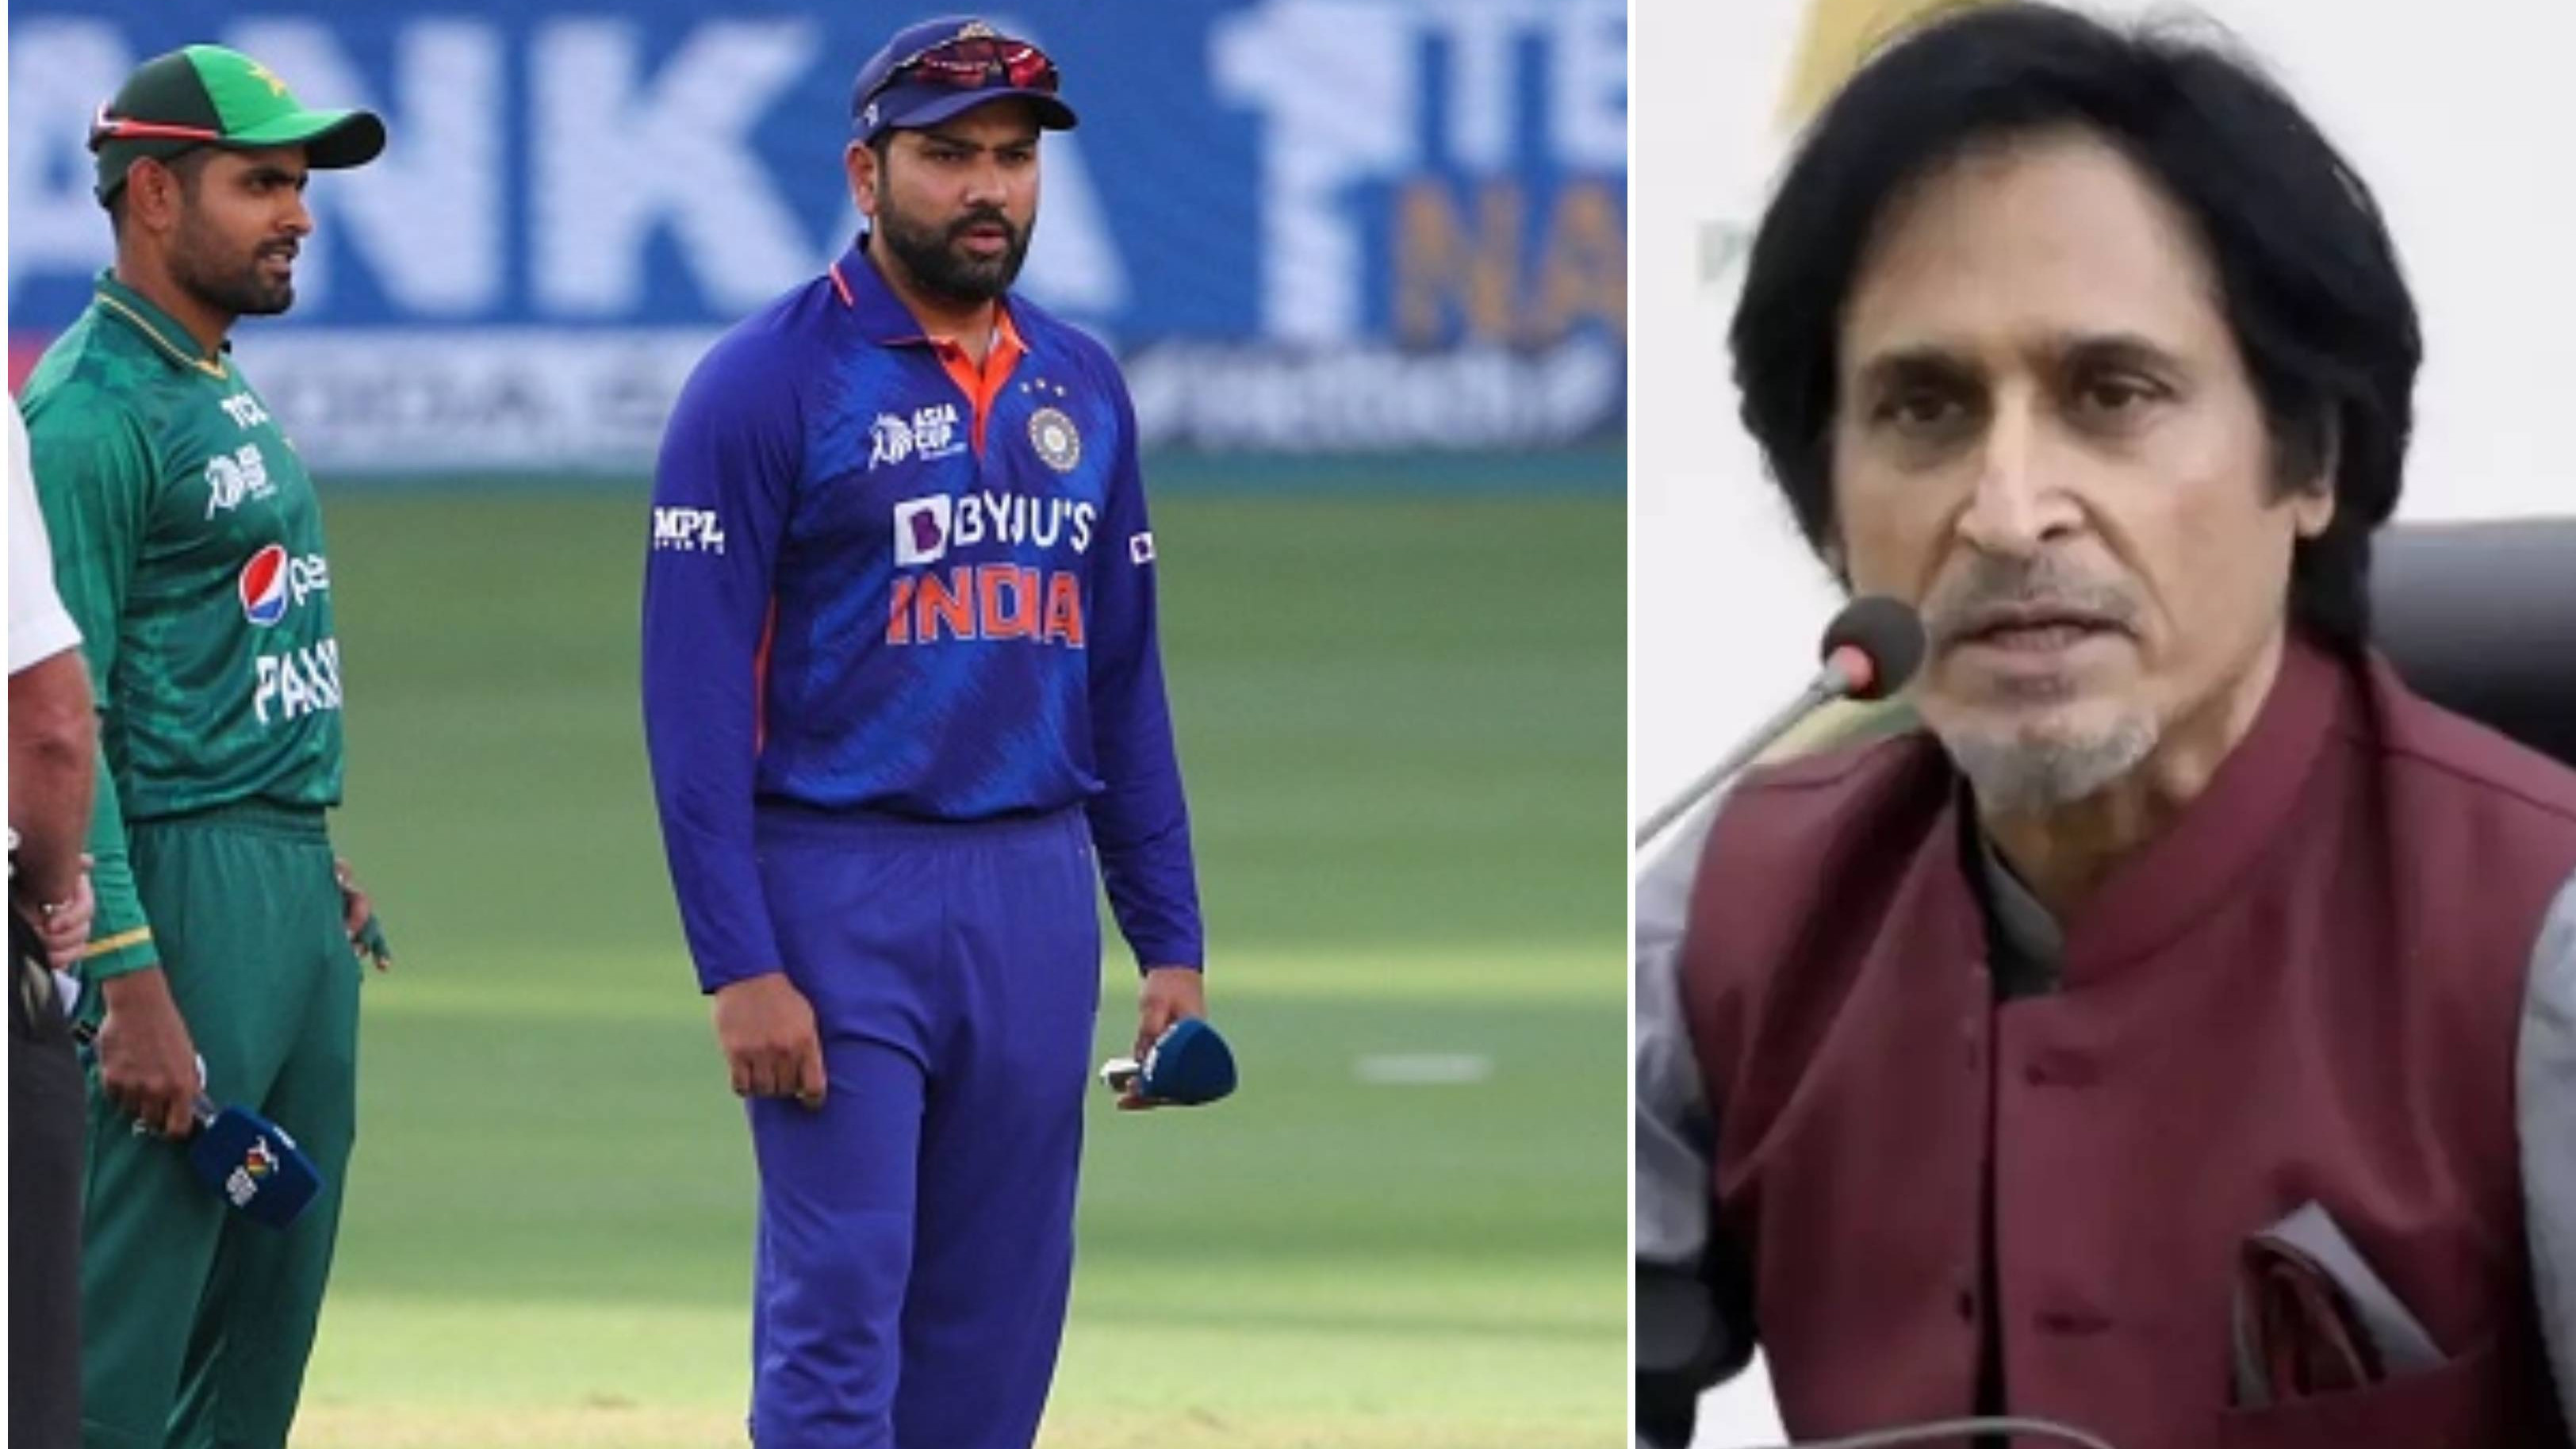 Pakistan should beat India for them to consider us as a superpower: Ramiz Raja’s message to Babar Azam as PCB chief